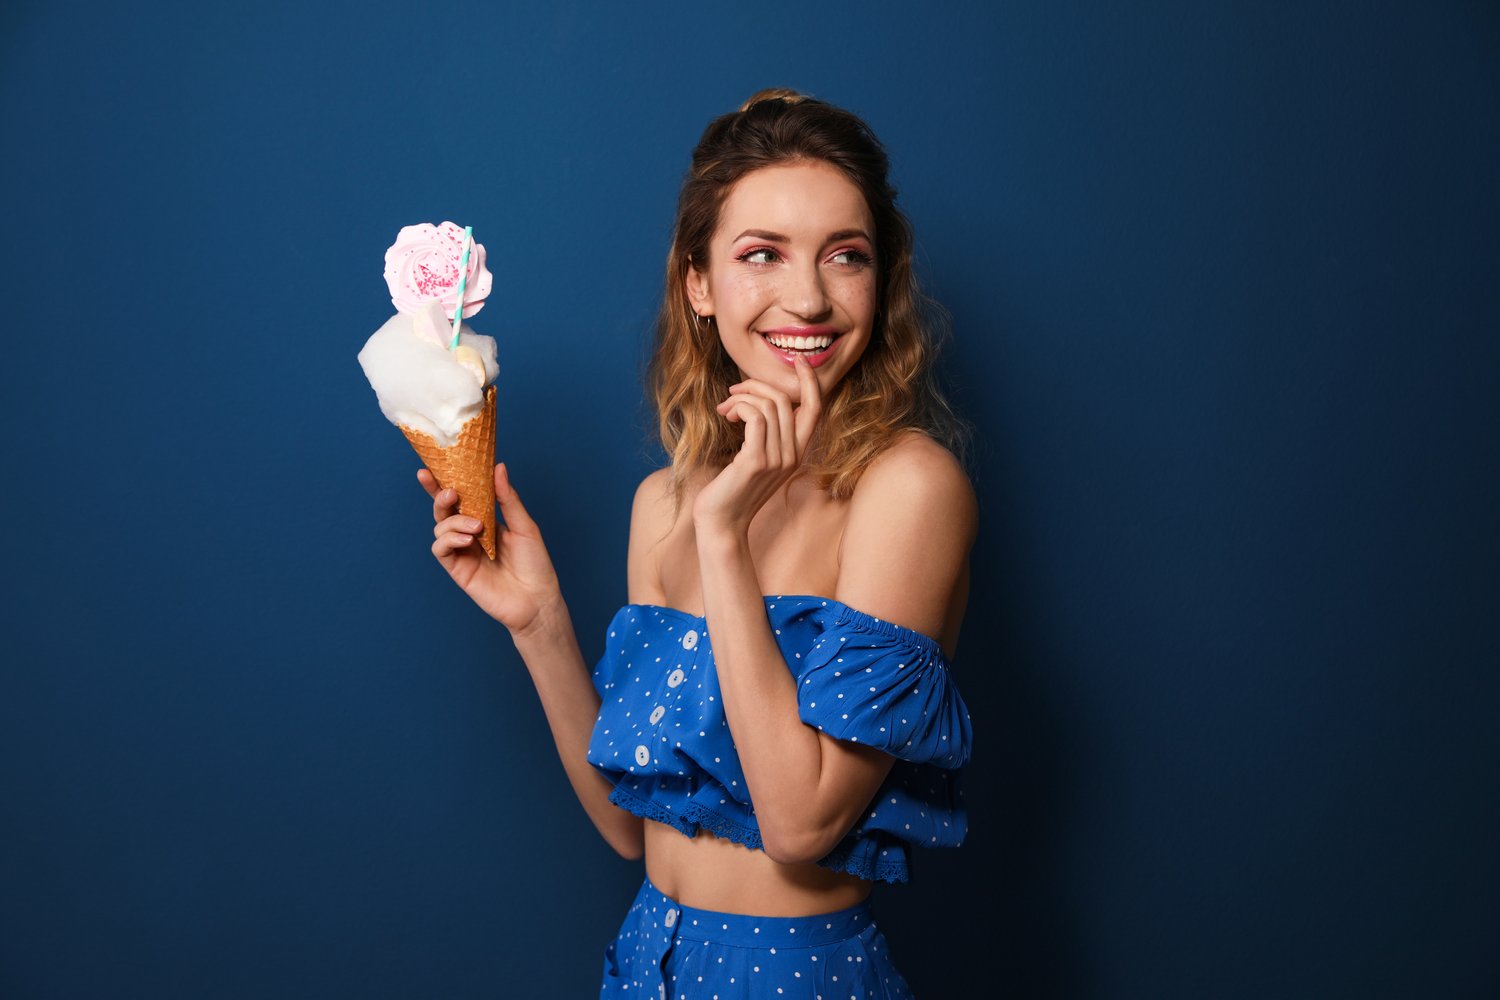 Photo of portrait of young woman holding cotton candy dessert on blue background